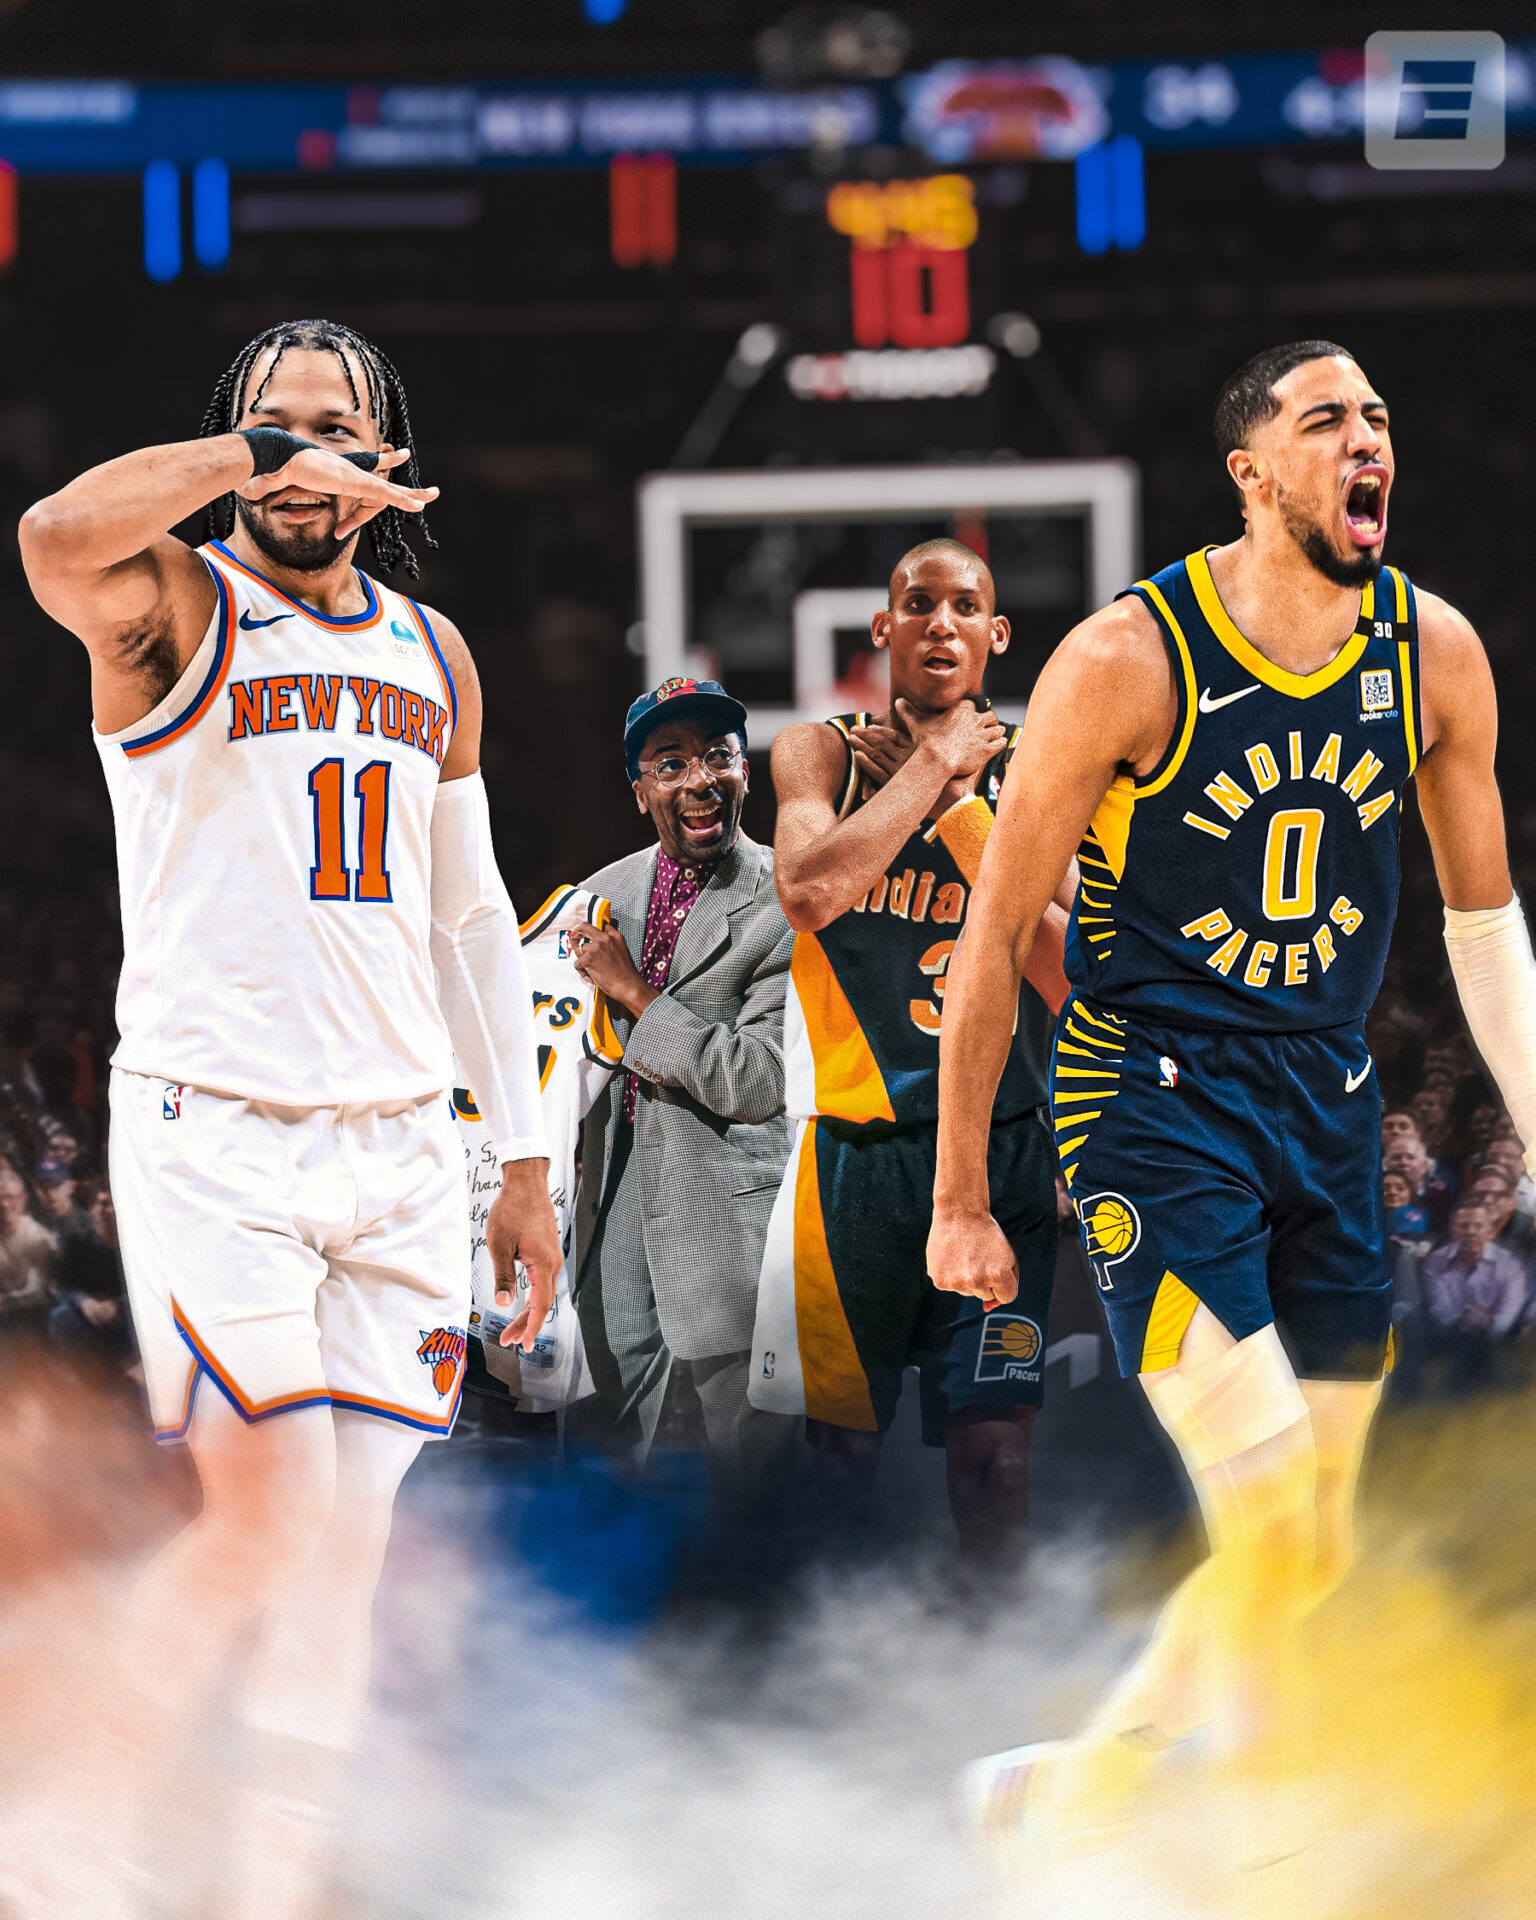 Defense, Drama, and Determination: Pacers vs. Knicks – A Semifinals Series You Don’t Want to Miss!